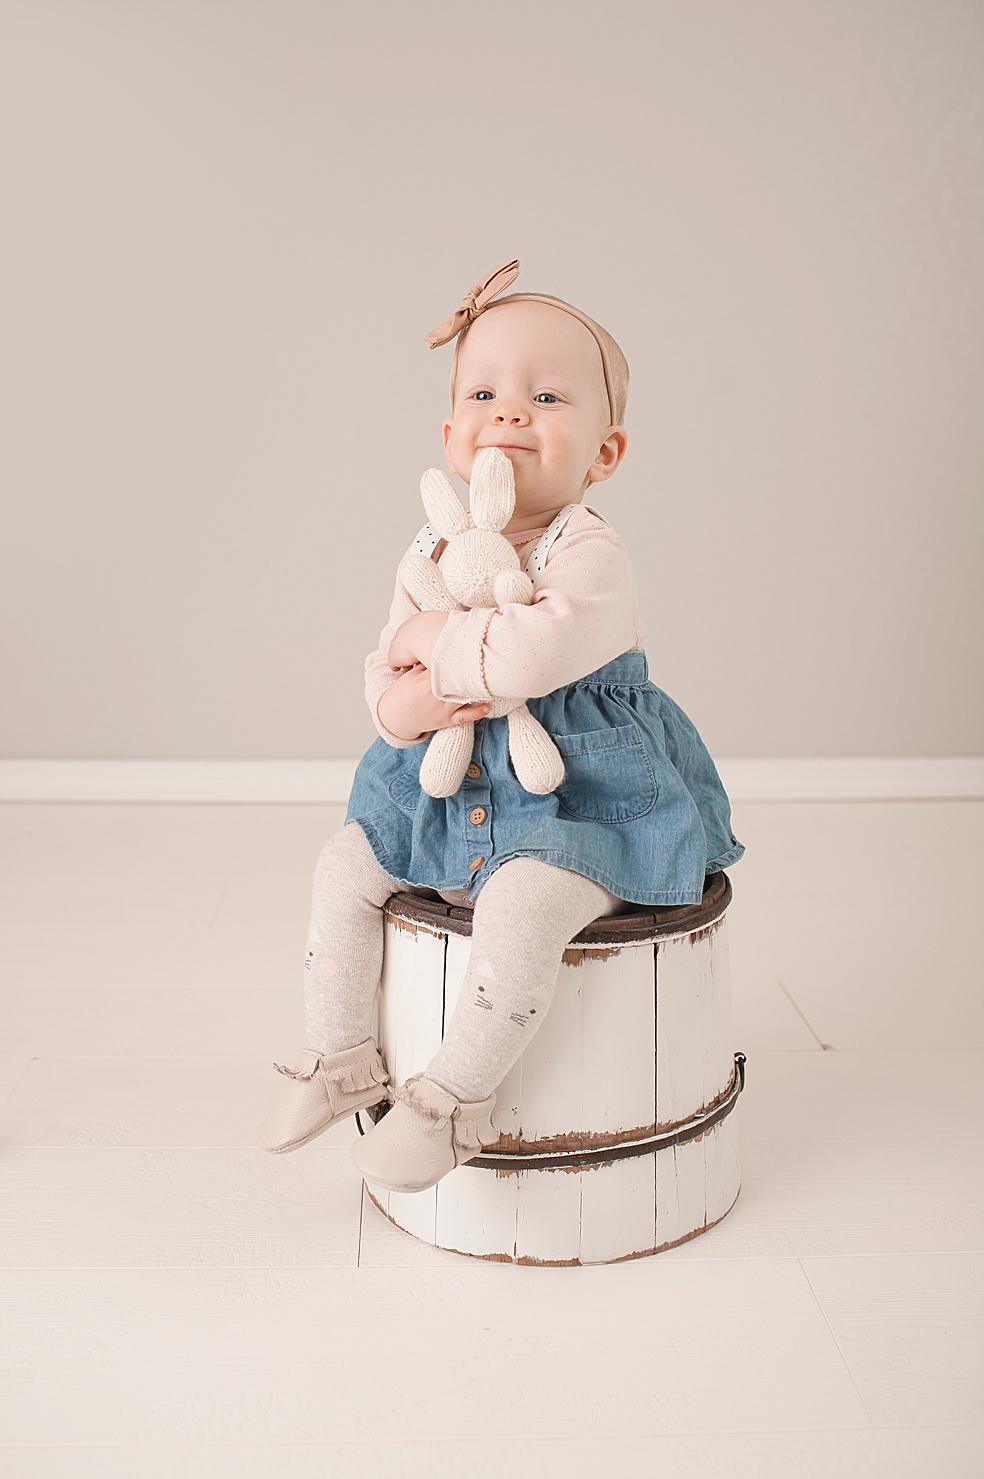 Baby girl sitting holding a stuffed bunny | Photo by Decatur Alabama Baby Photographer Jessica Lee 